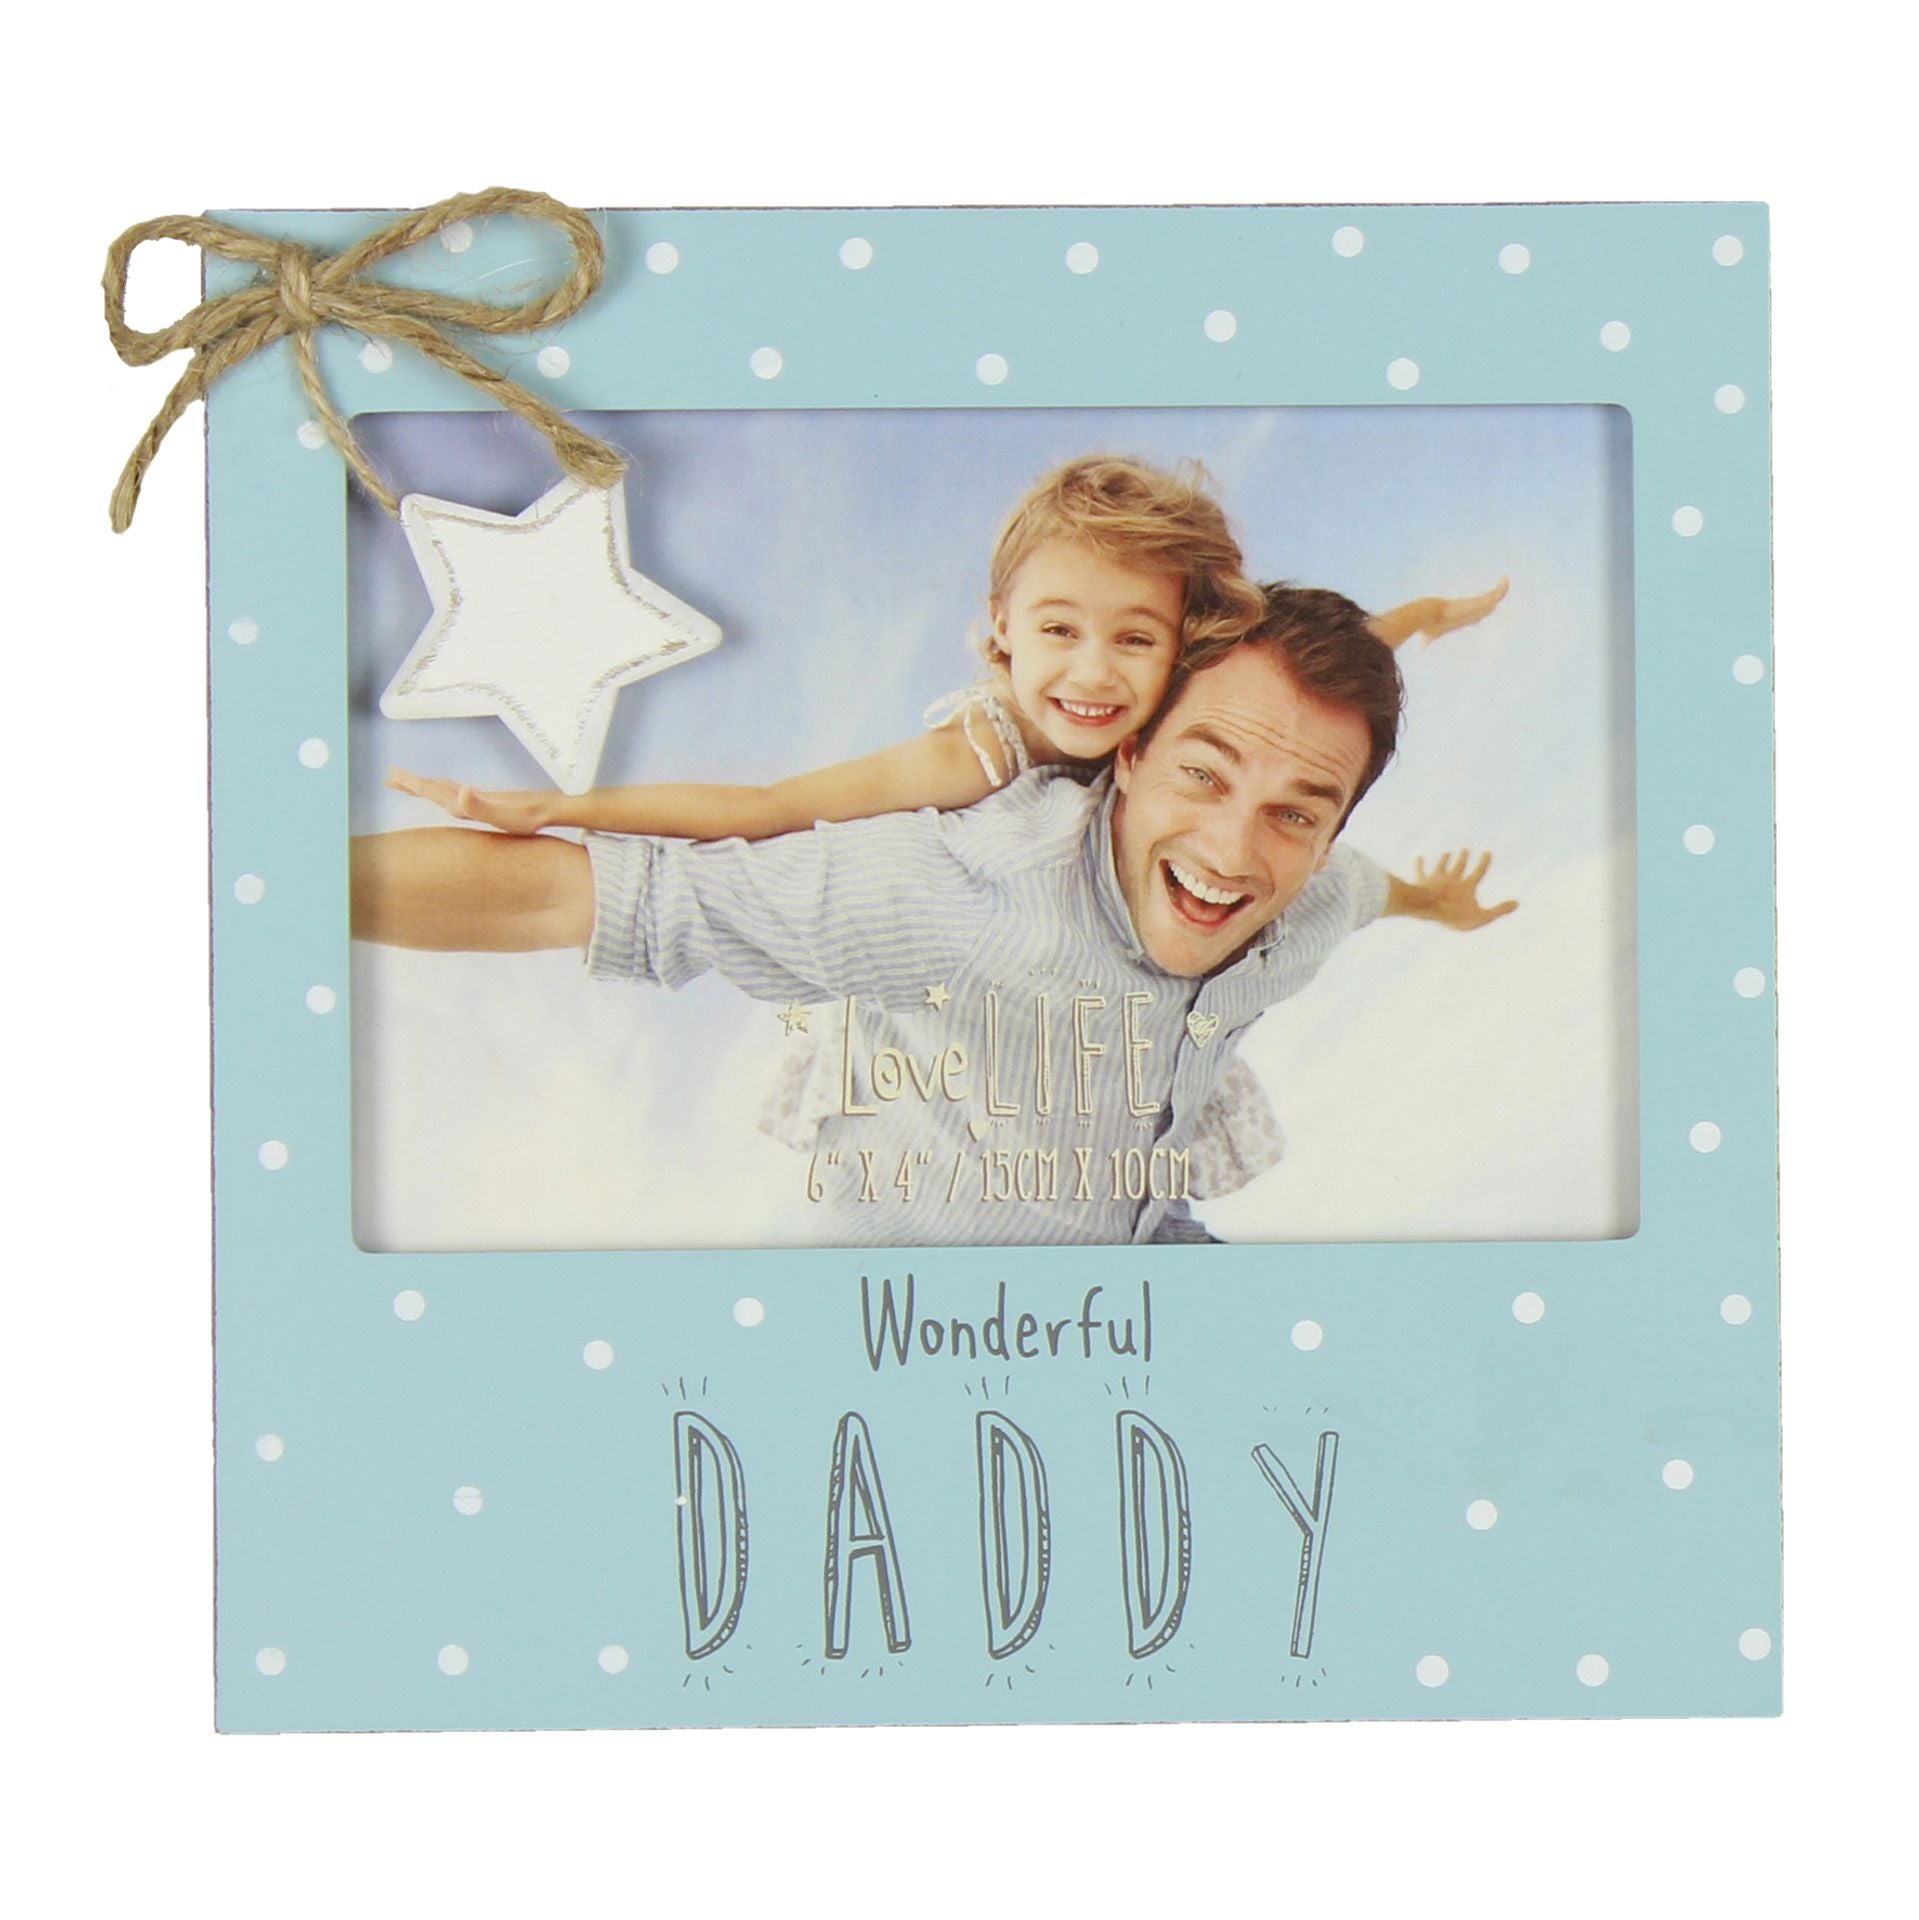 Let your Dad know just how special he is with this &#39;Wonderful Daddy&#39; Photo Frame from Love Life. This stylish blue polka dot photo frame makes for a perfect gift to a Dad on Father&#39;s Day, their birthday or any other special occasion.